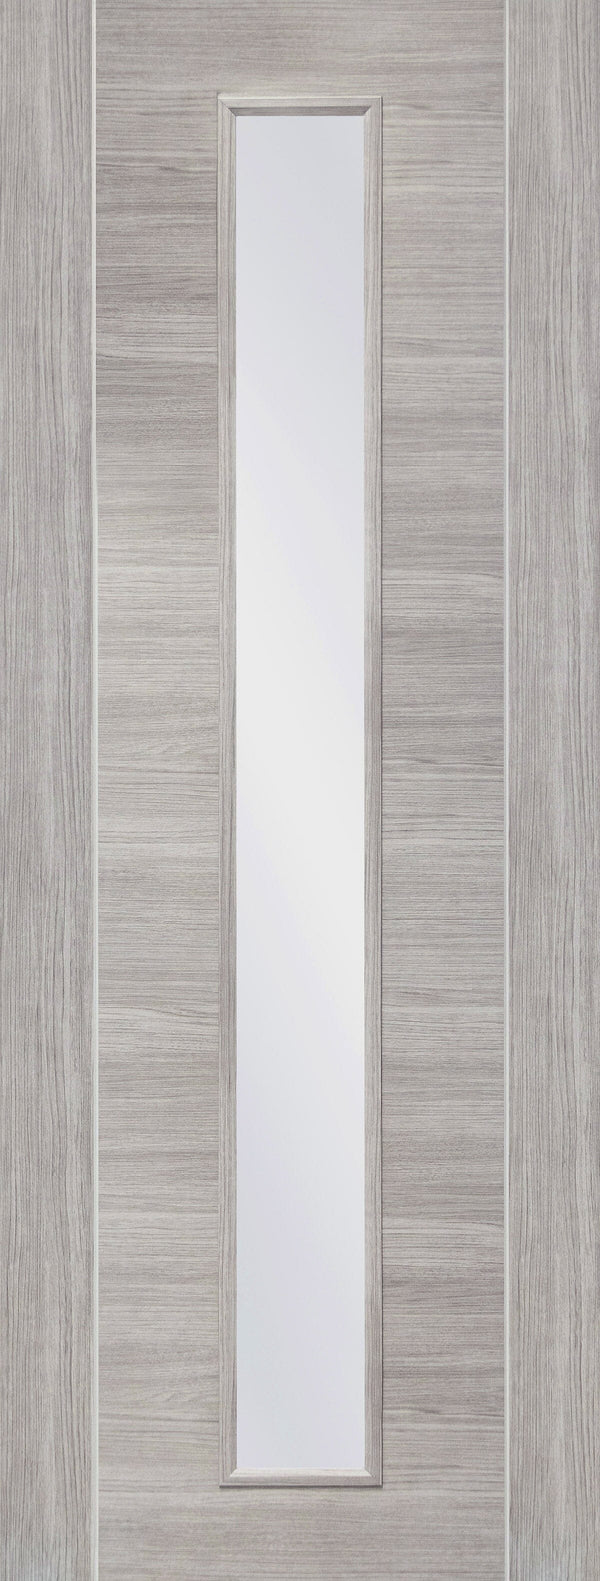 Laminate White Grey Forli Pre-Finished Internal Door with Clear Glass